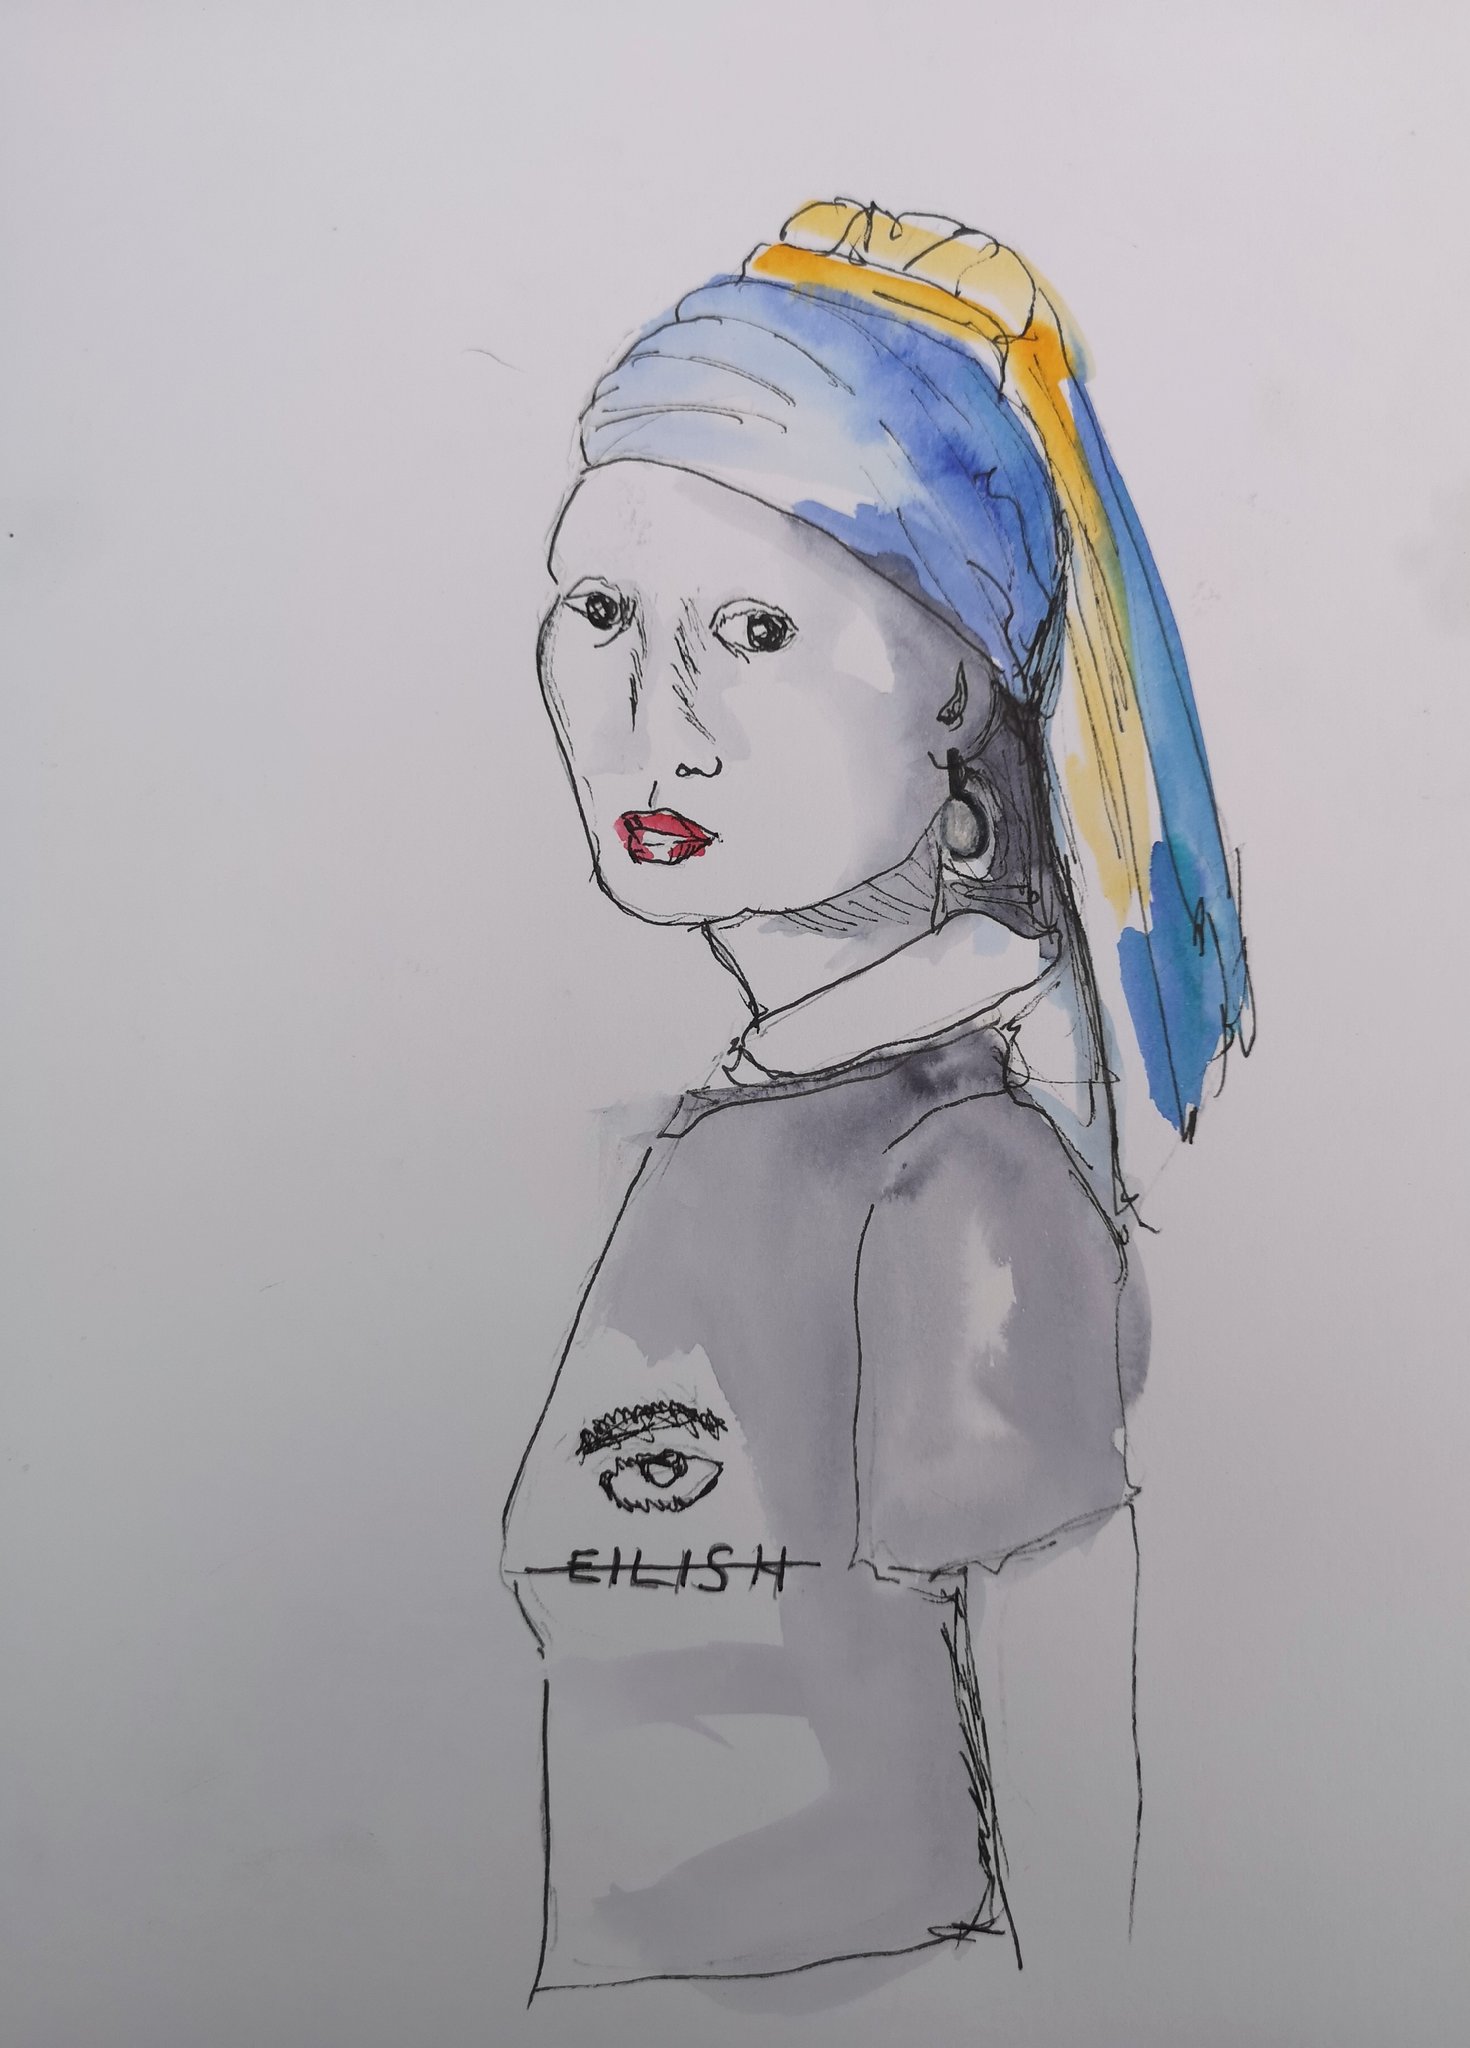 'Girl with a Pearl Earring' by Mary Arkinstall